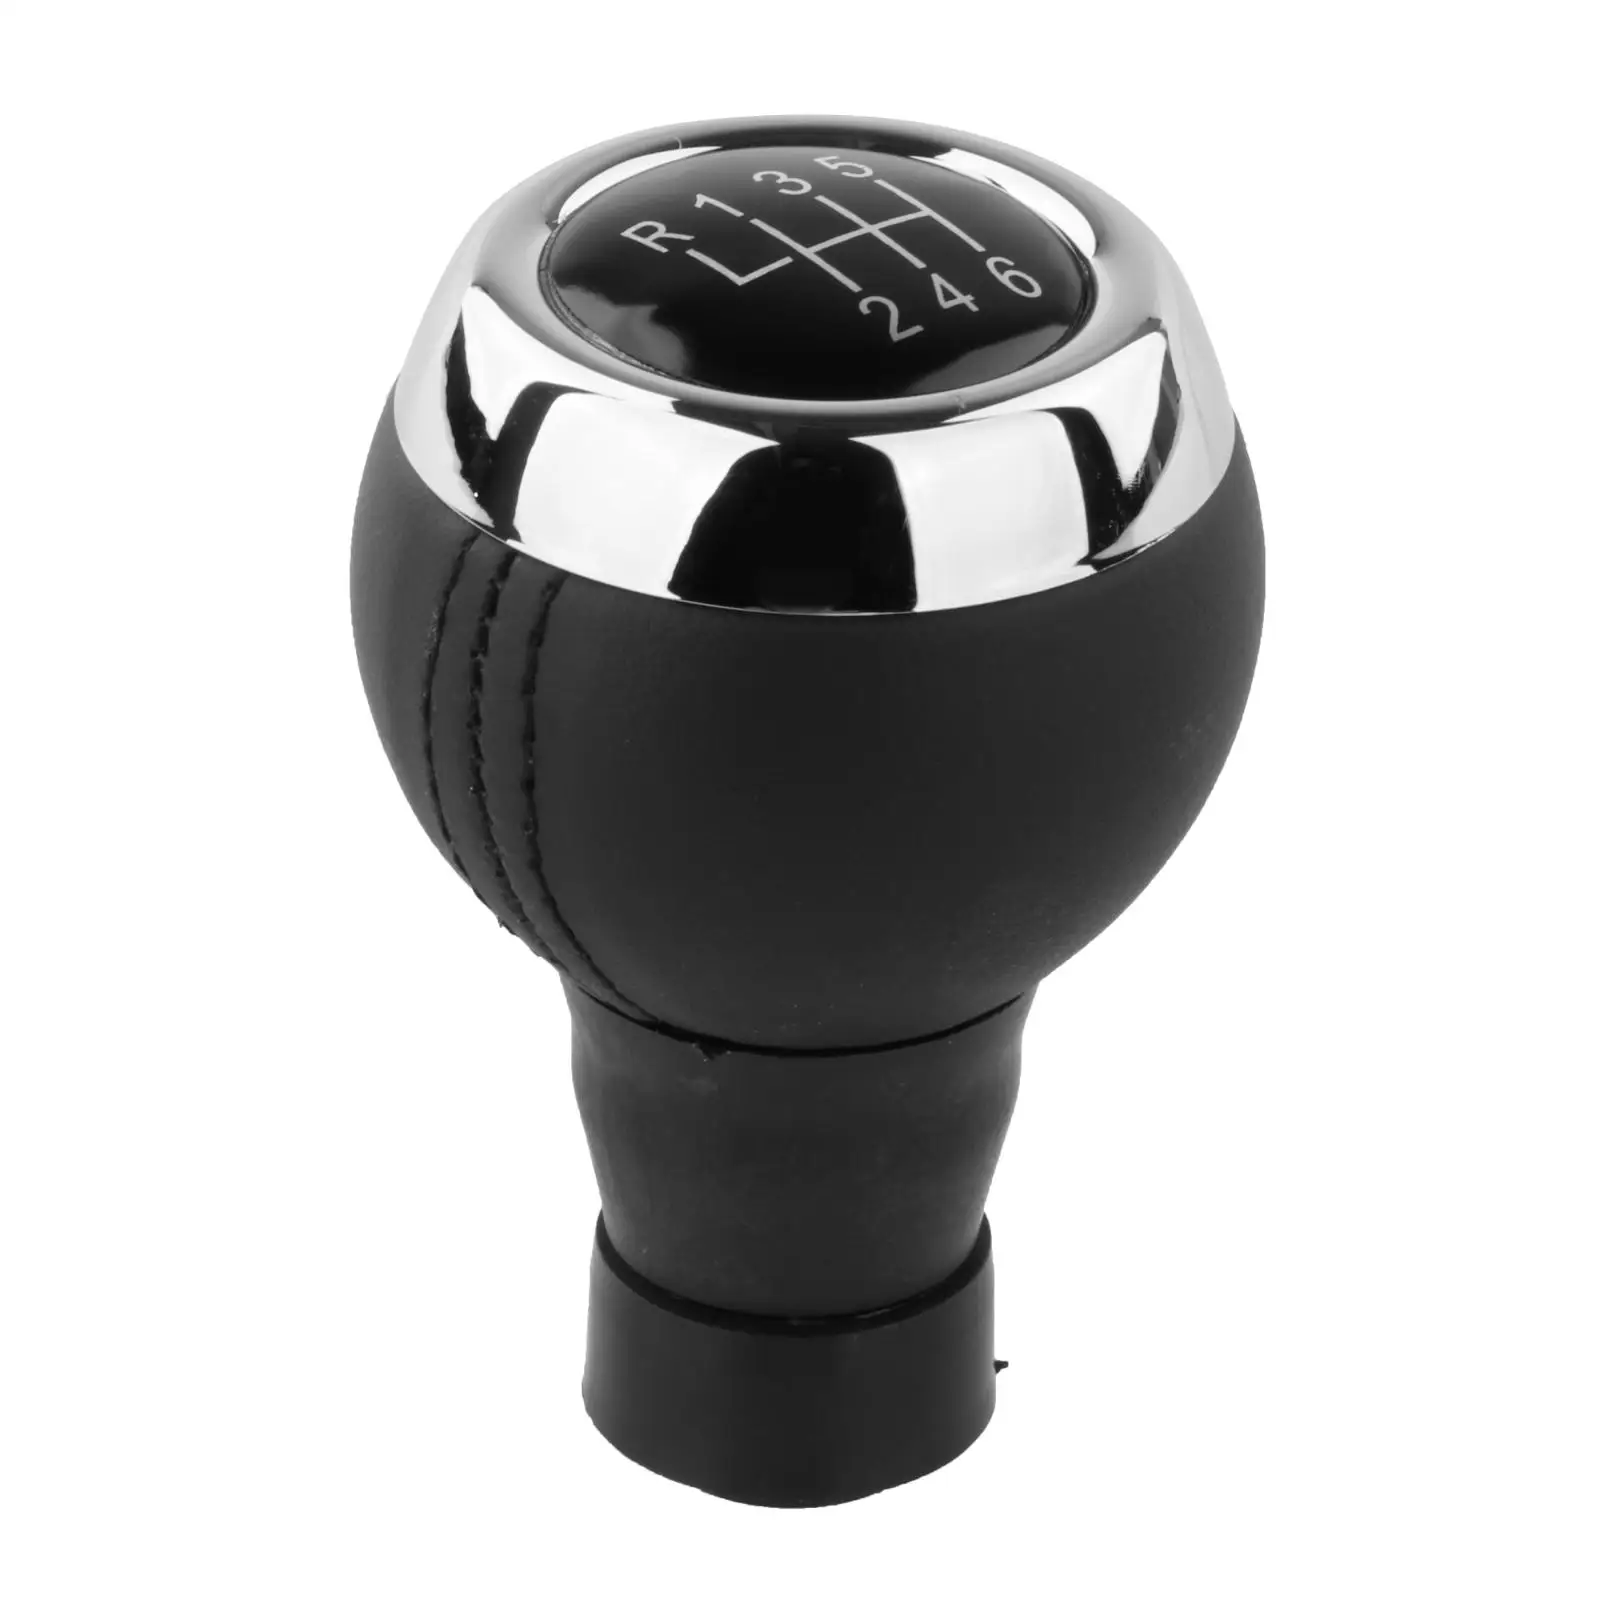 Gear Knob Head Manual Gear Knob 6  Modification Fit for bmw Mini, Car Parts Replacement, Easy to Install